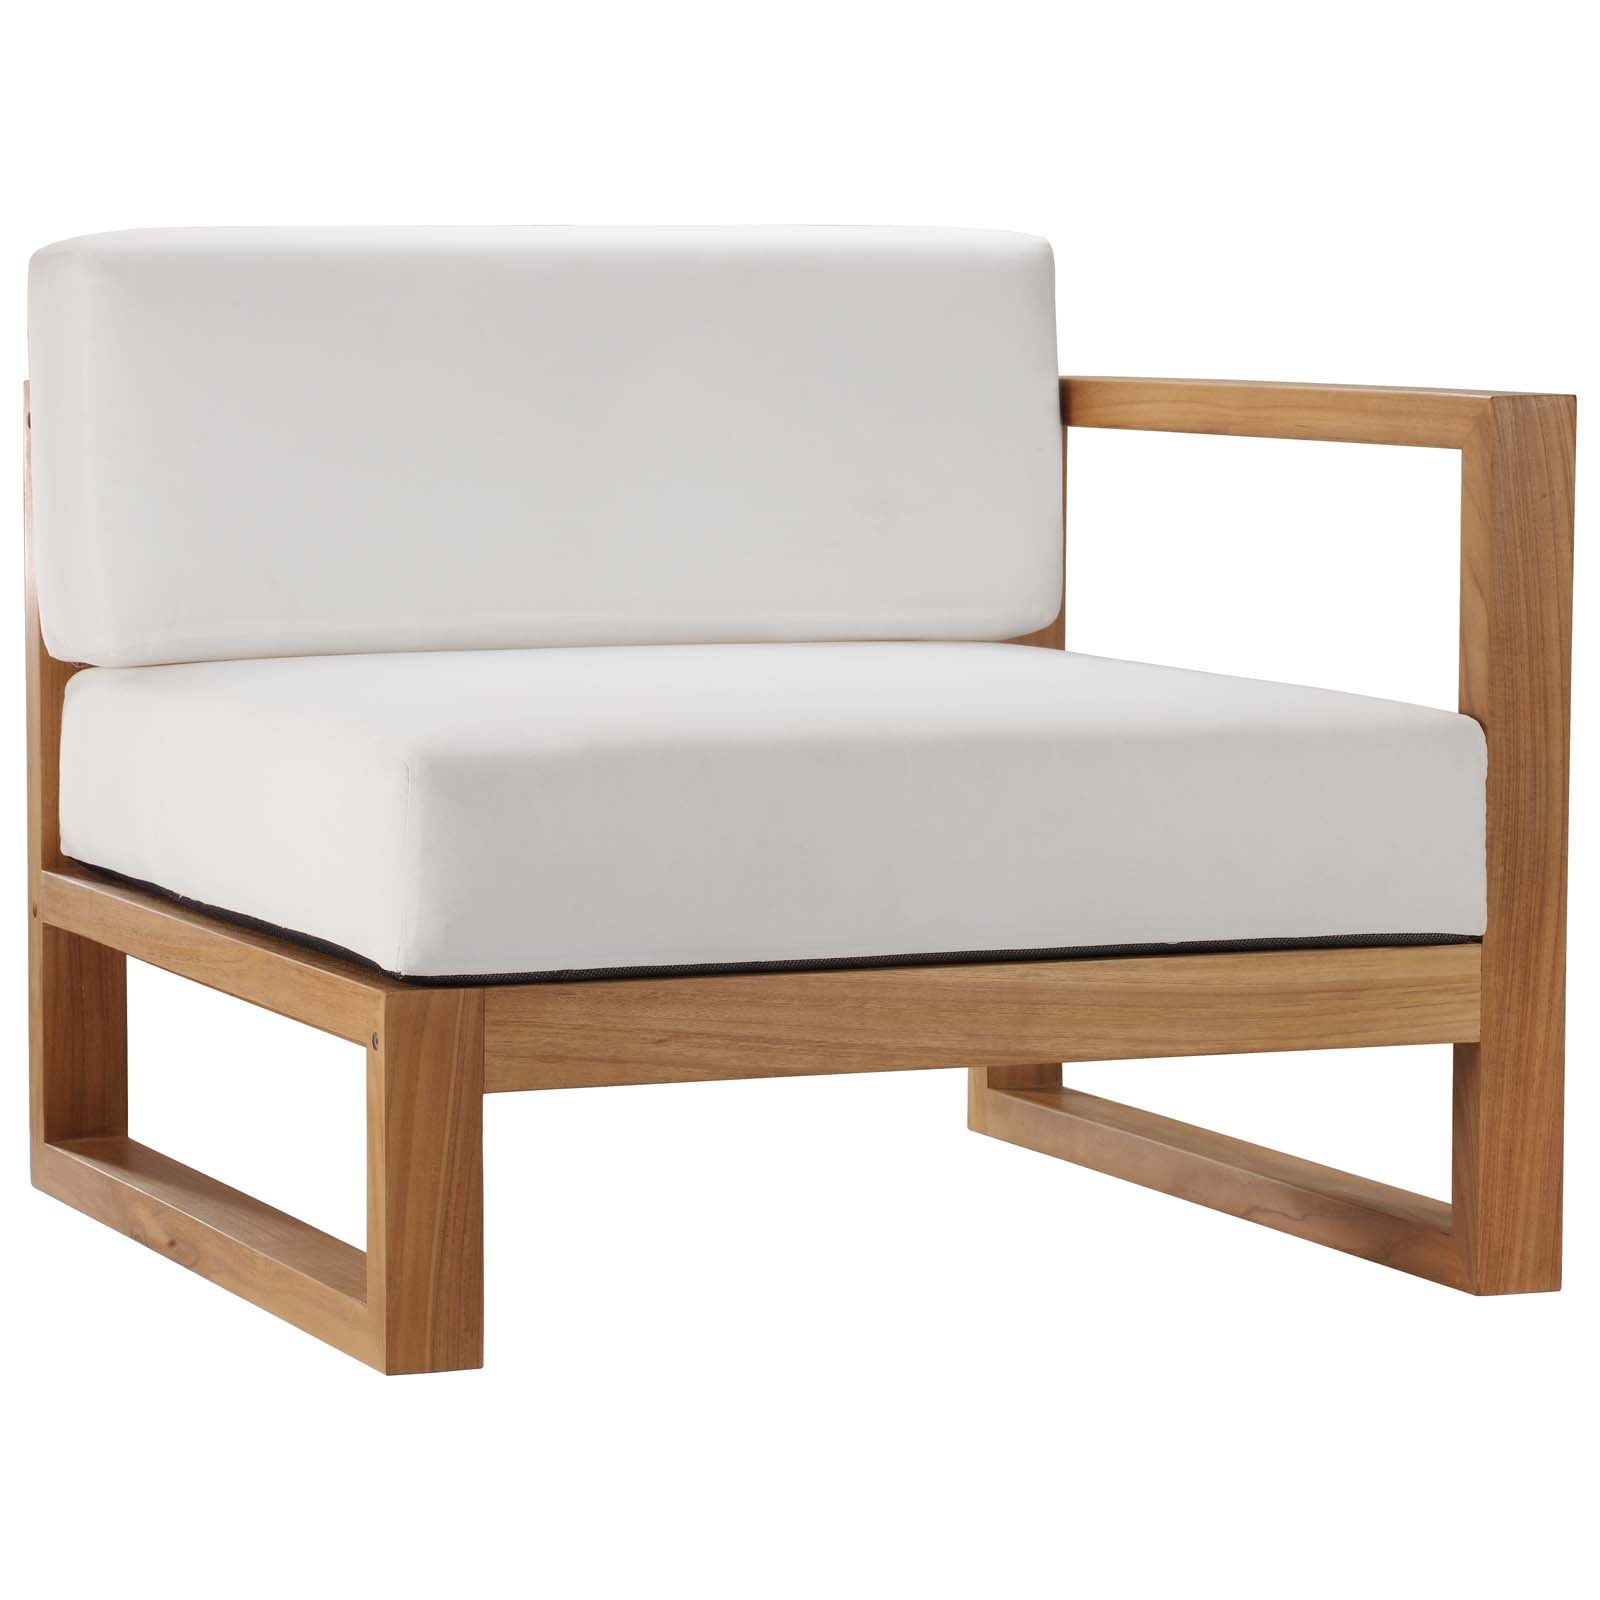 Modway Outdoor Conversation Sets - Upland Outdoor Patio Teak Wood 3-Piece Sectional Sofa Set Natural White 68"